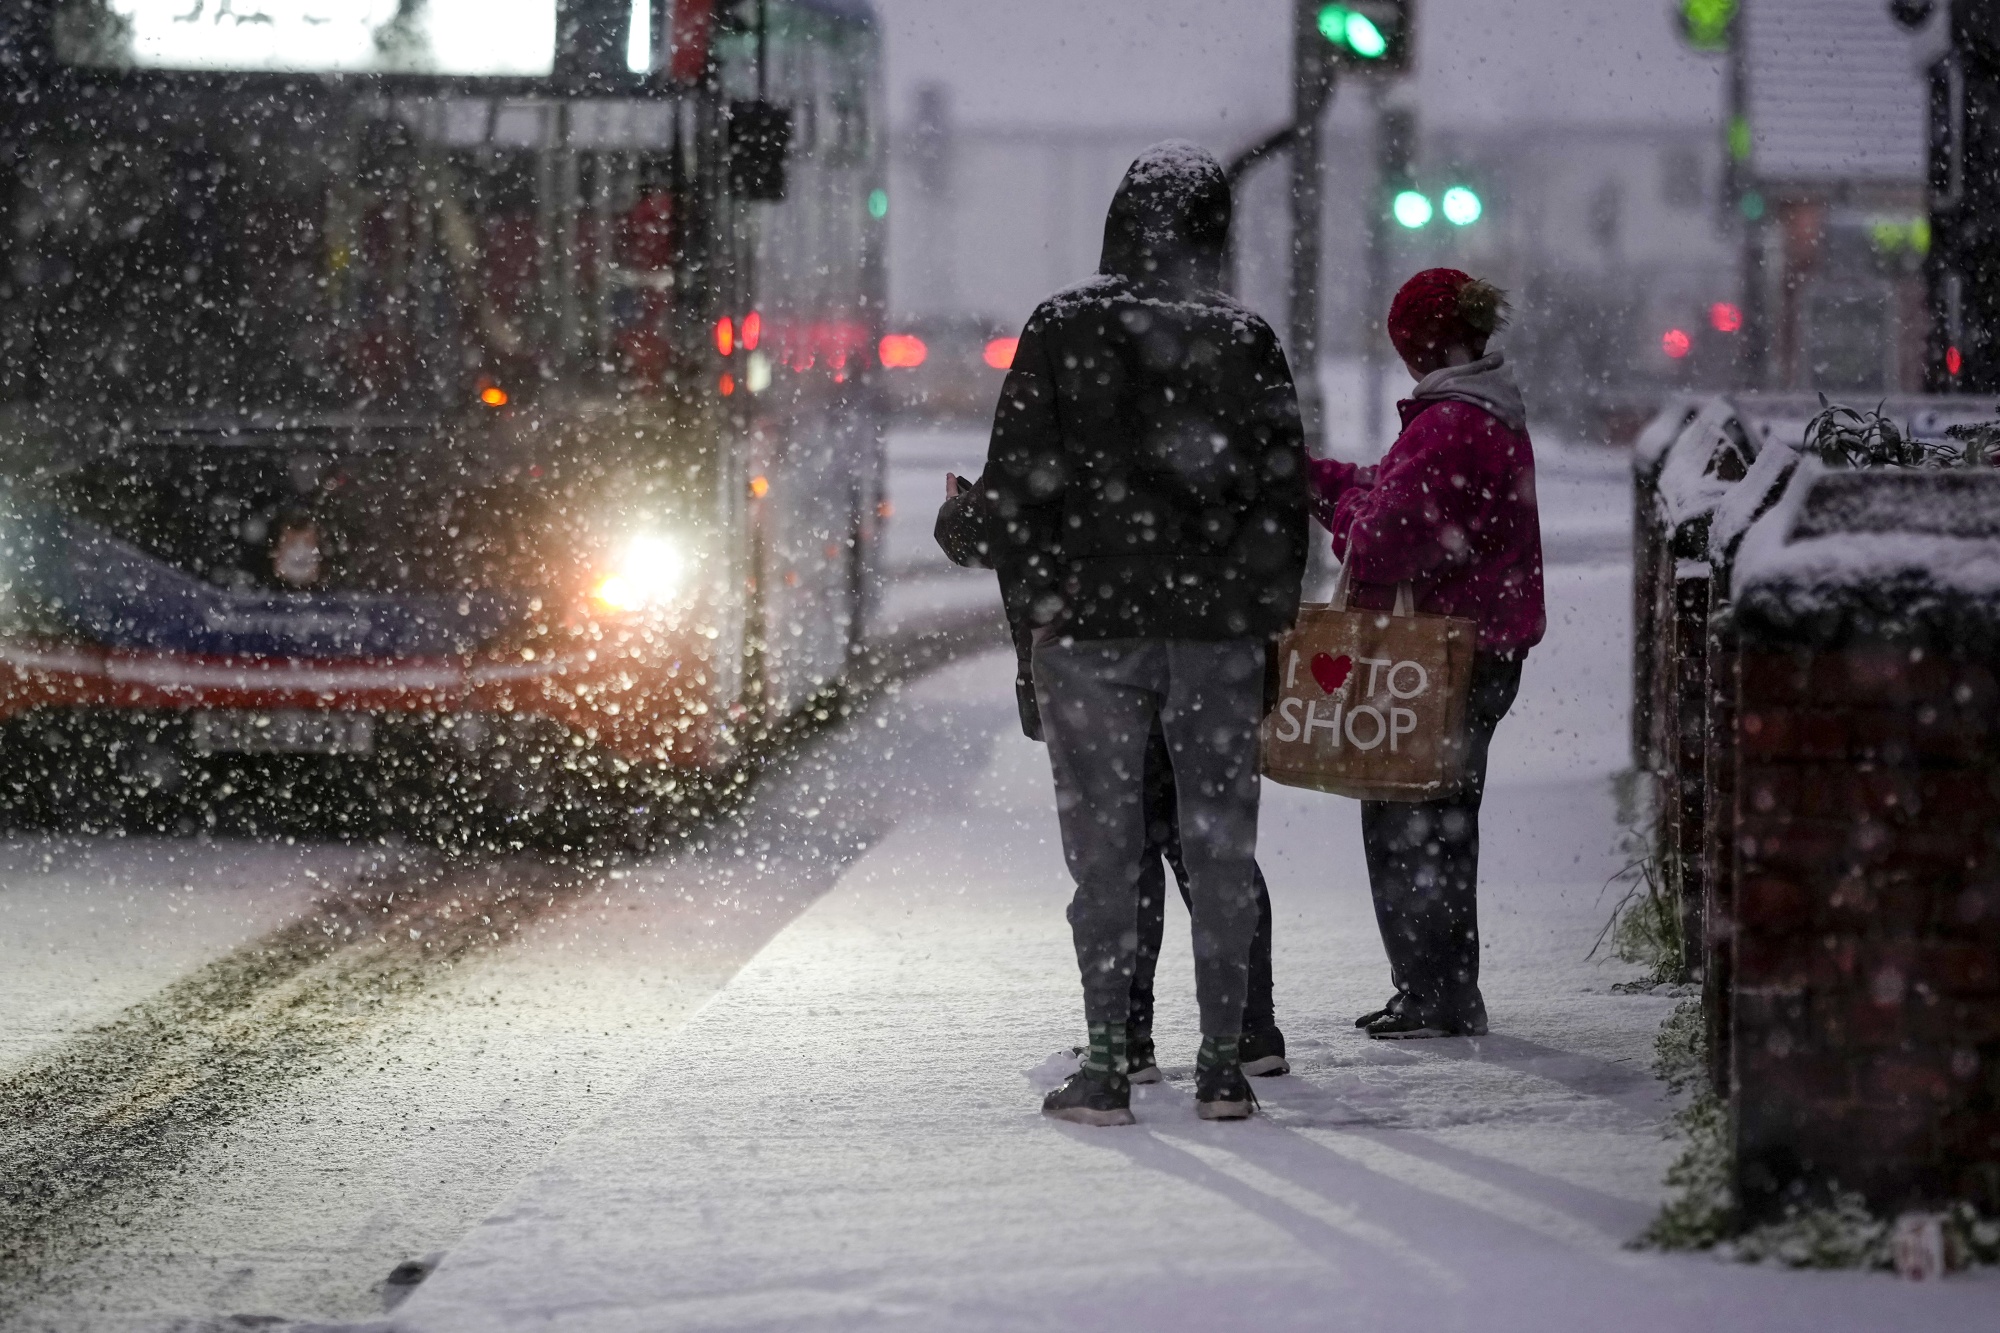 Winter weather, including snow and freezing temperatures, already